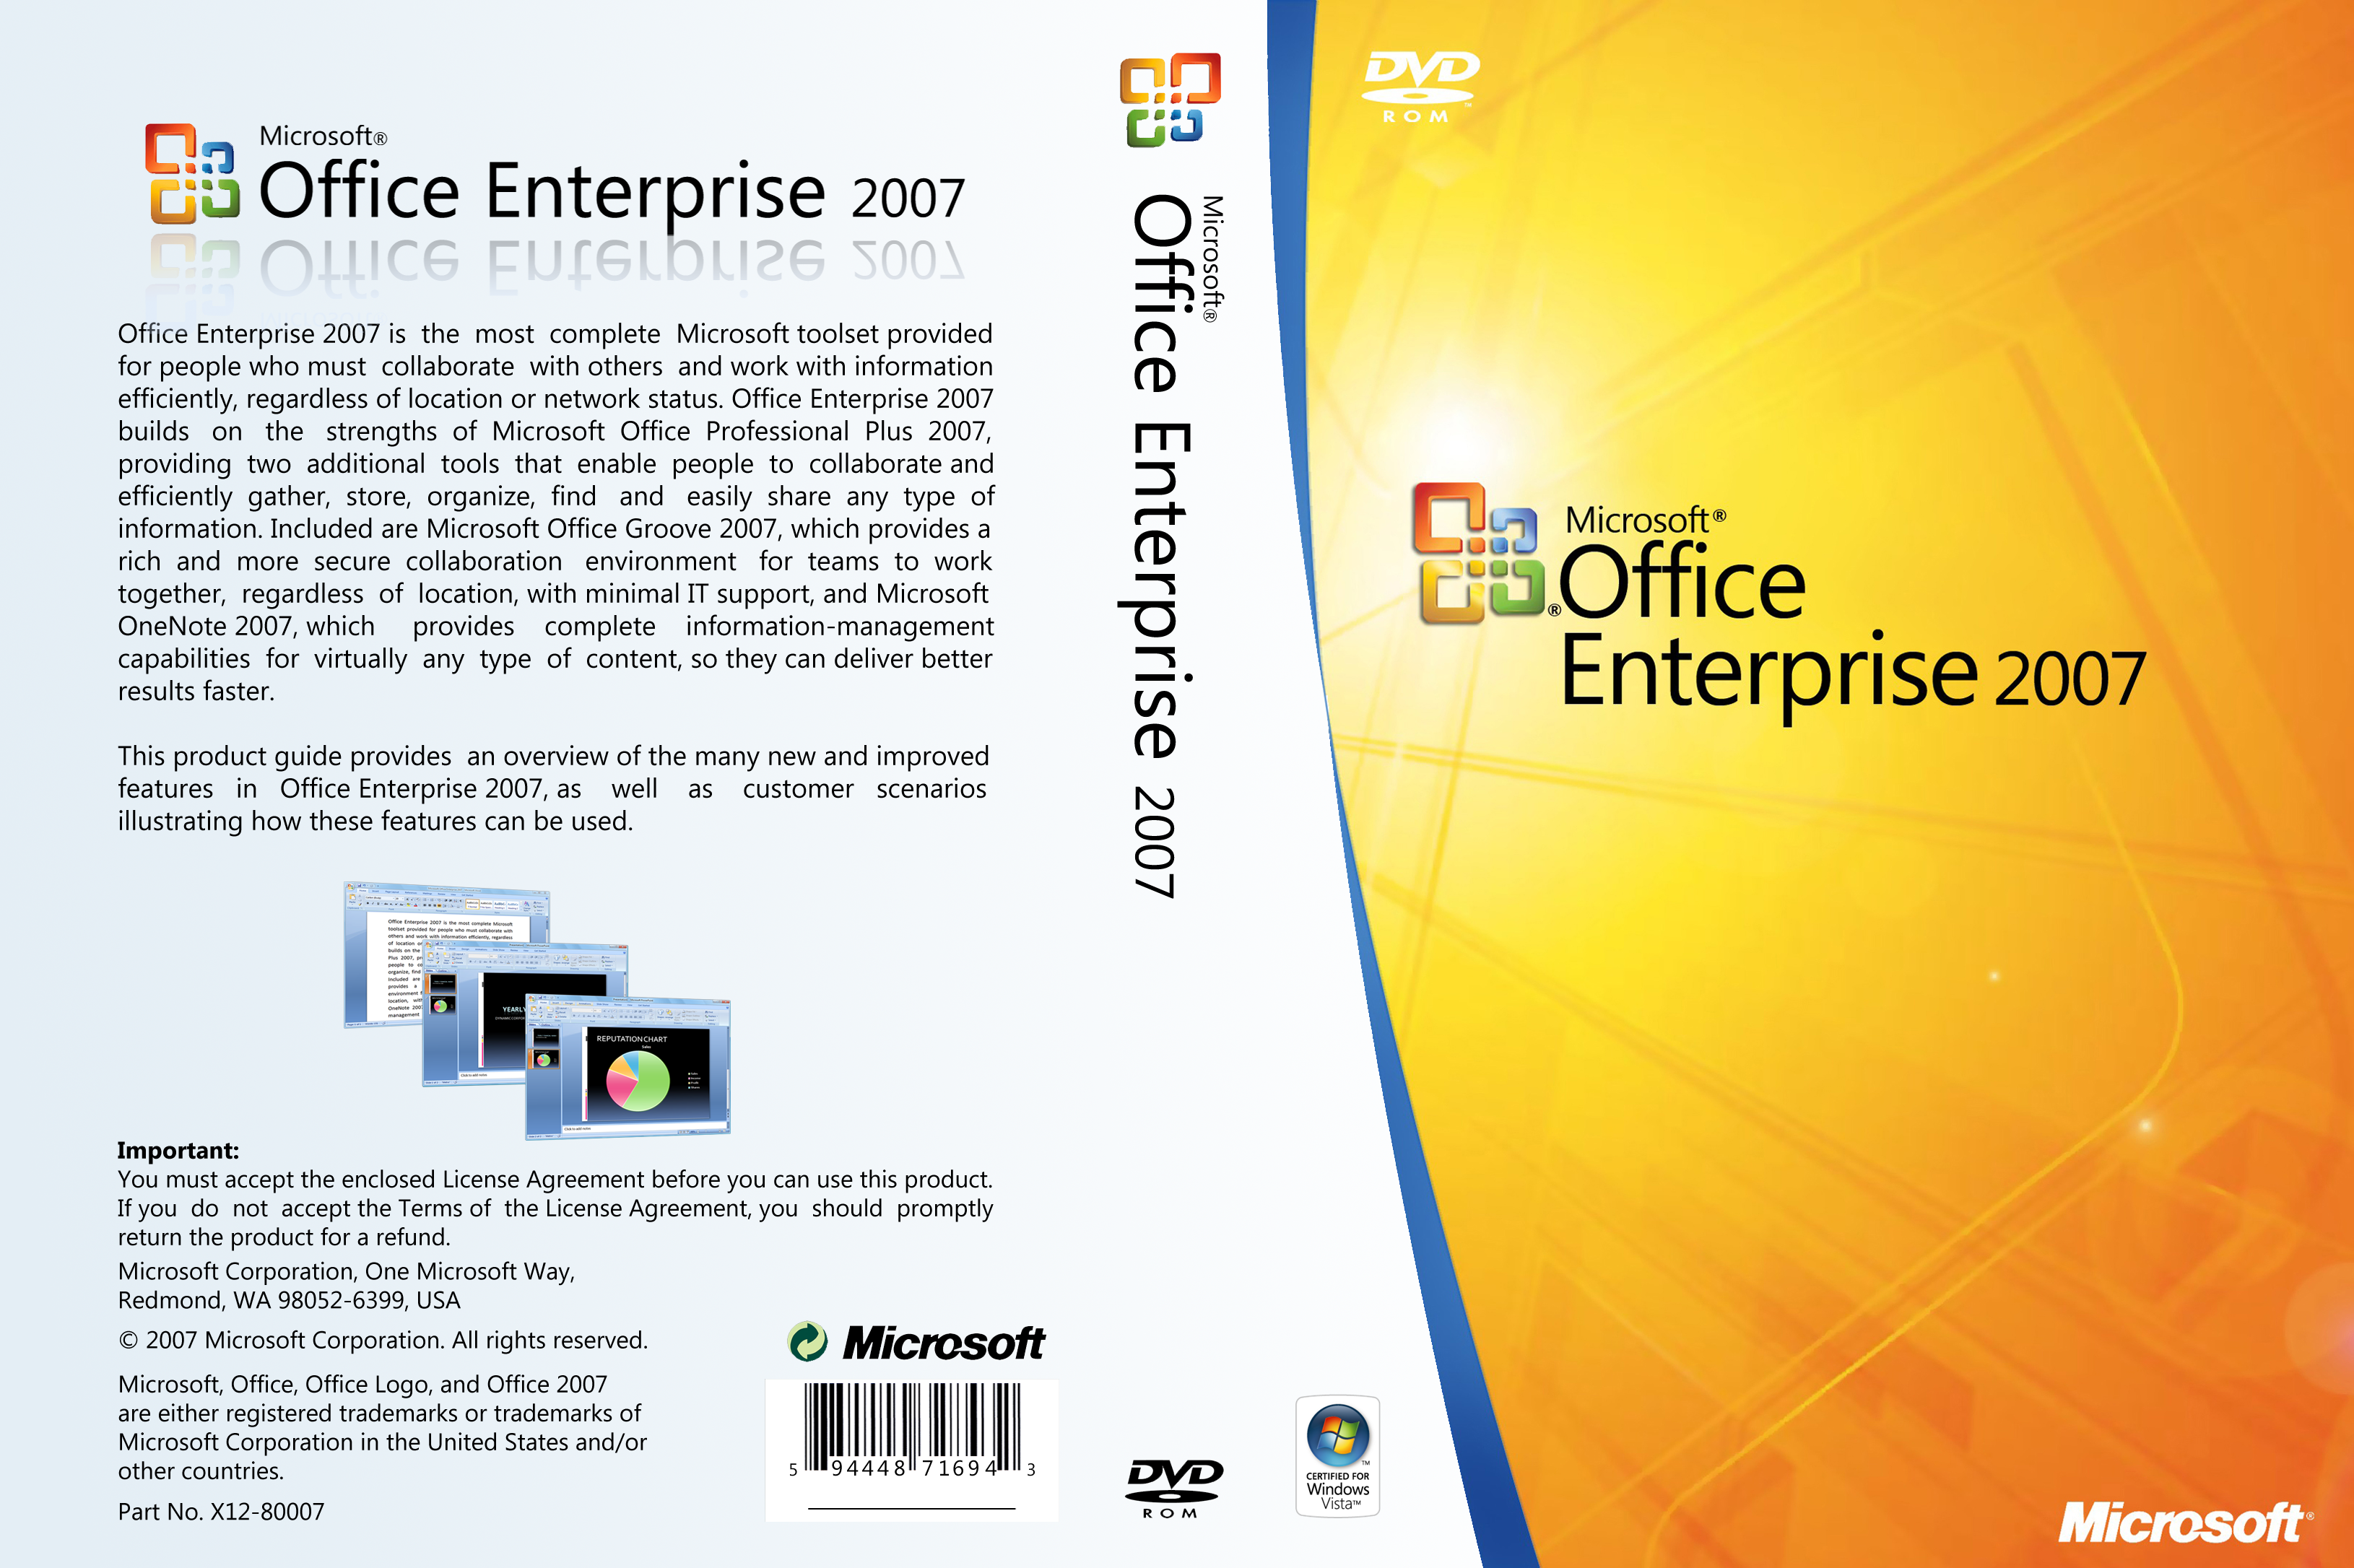 office 2007 pro download full version